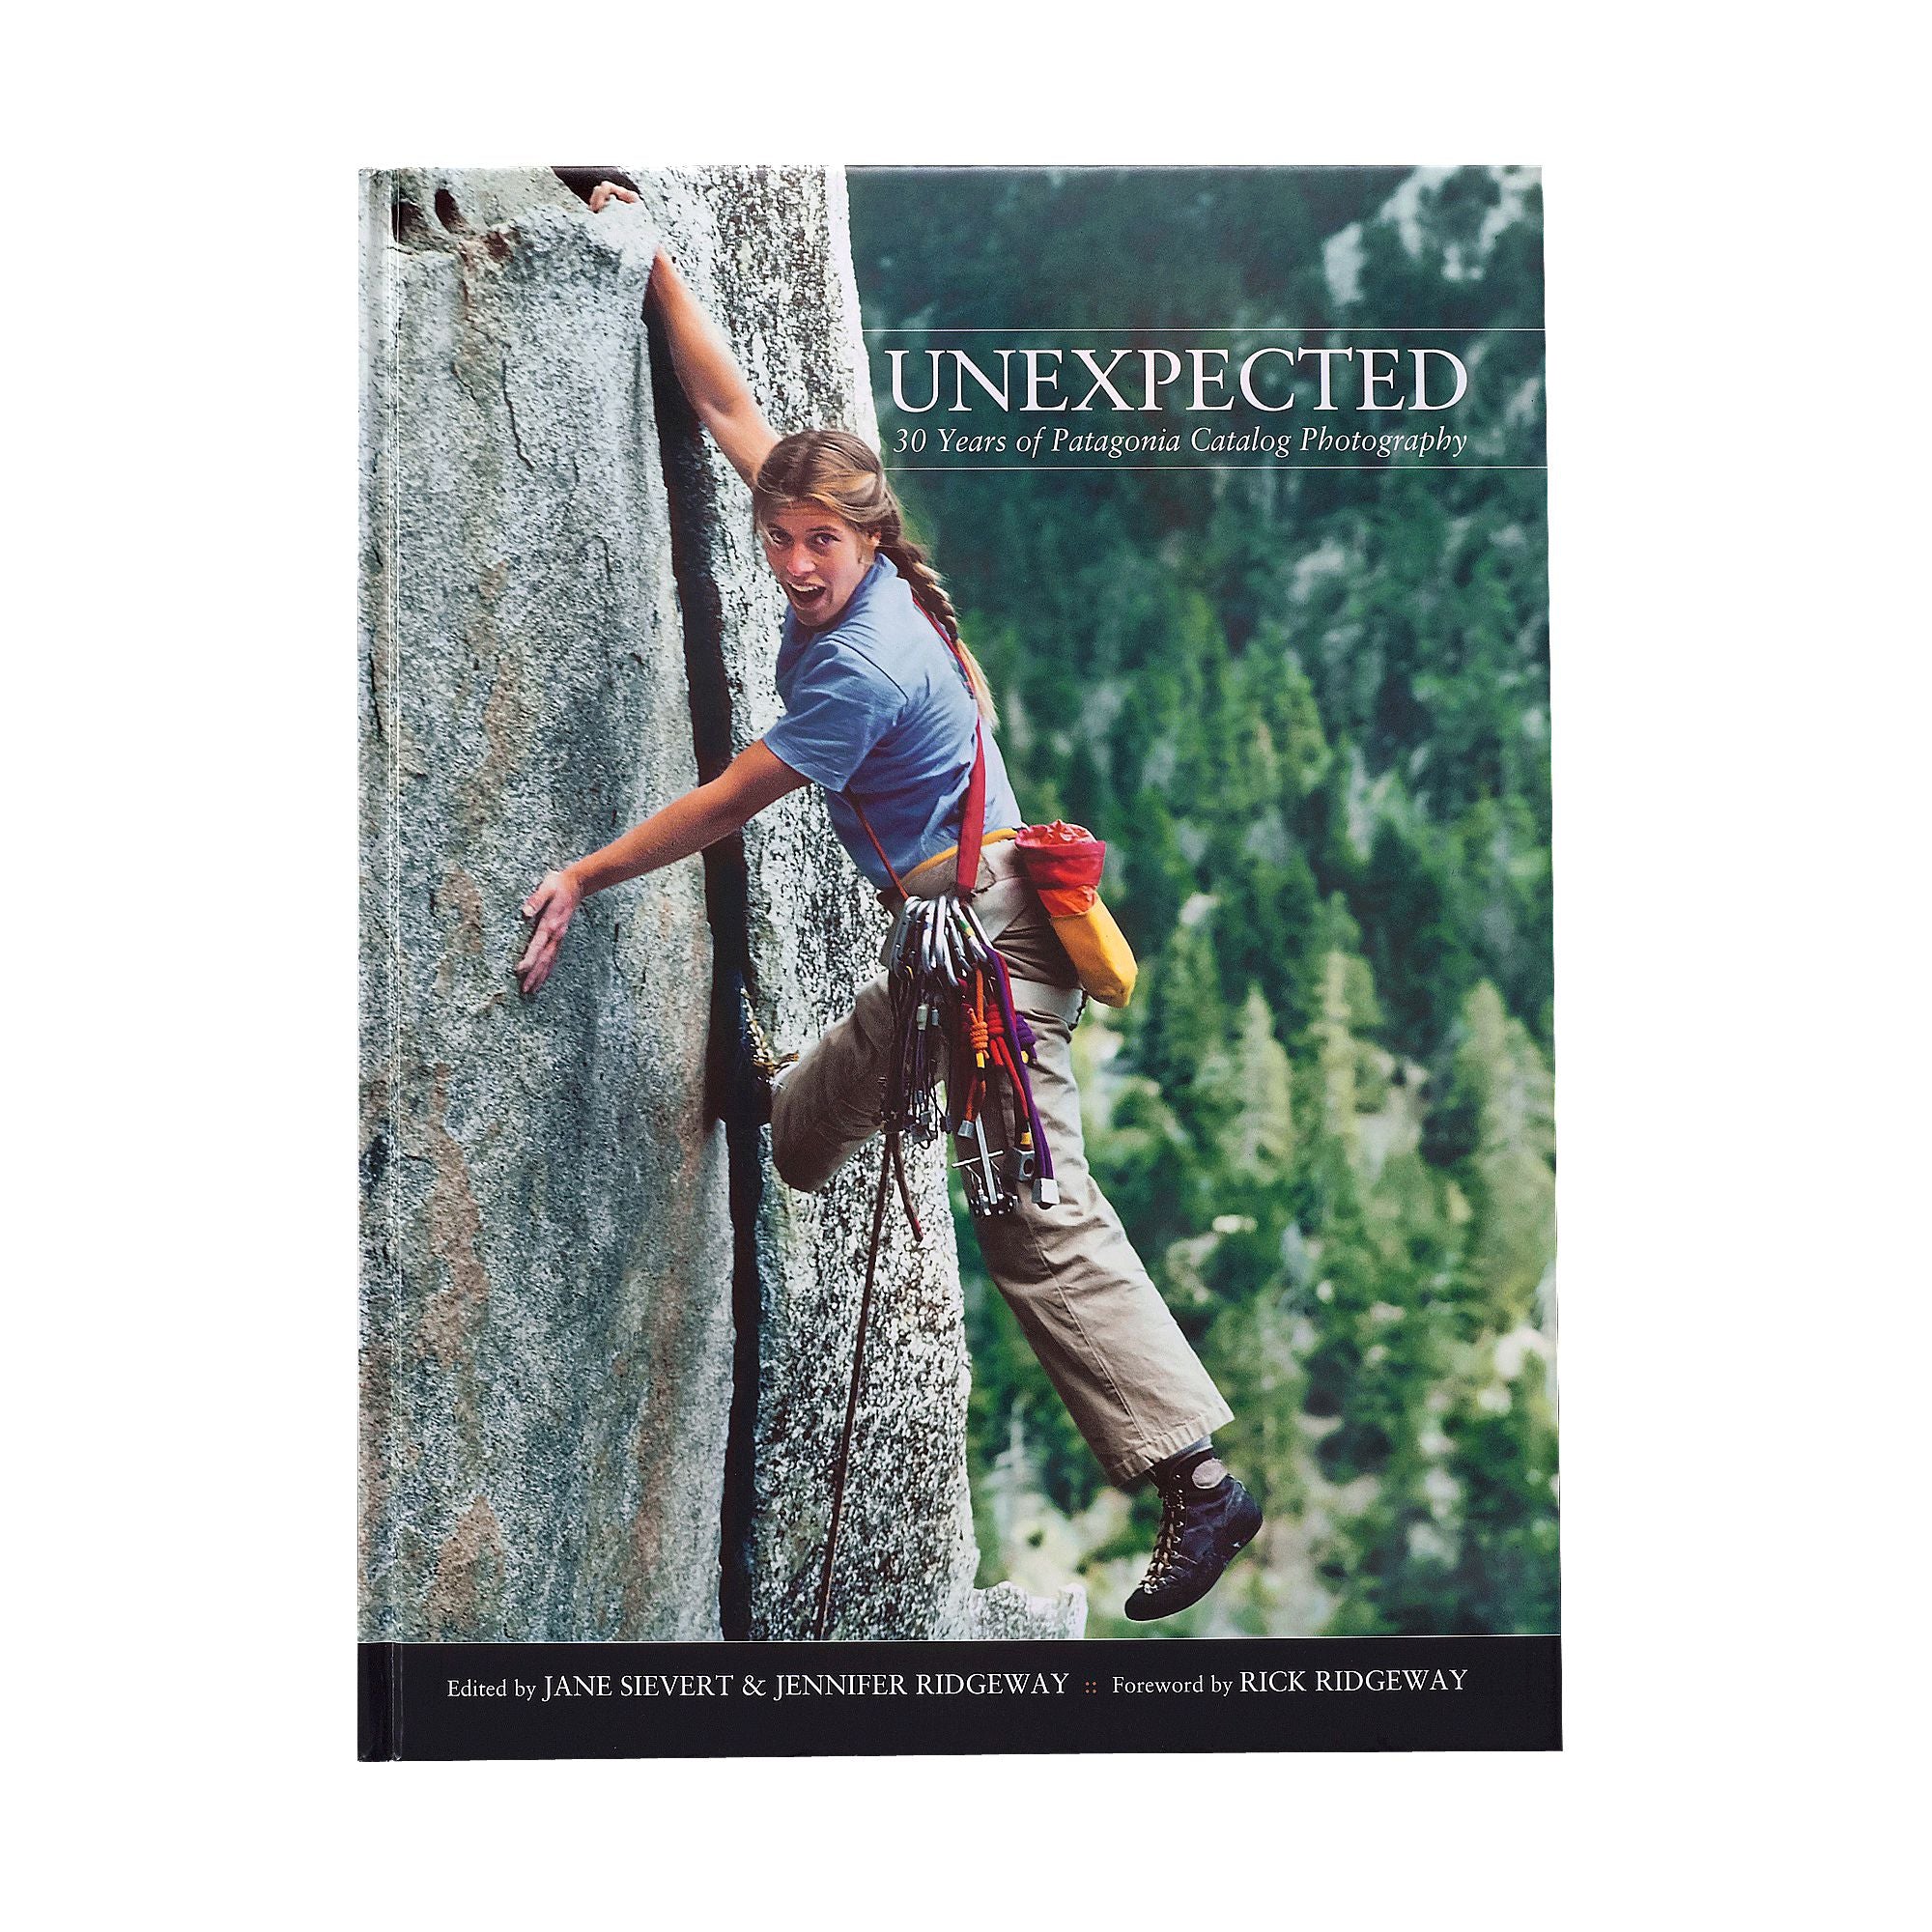 PATAGONIA "Unexpected: 30 Years Of Patagonia Catalog Photography" Japanese version